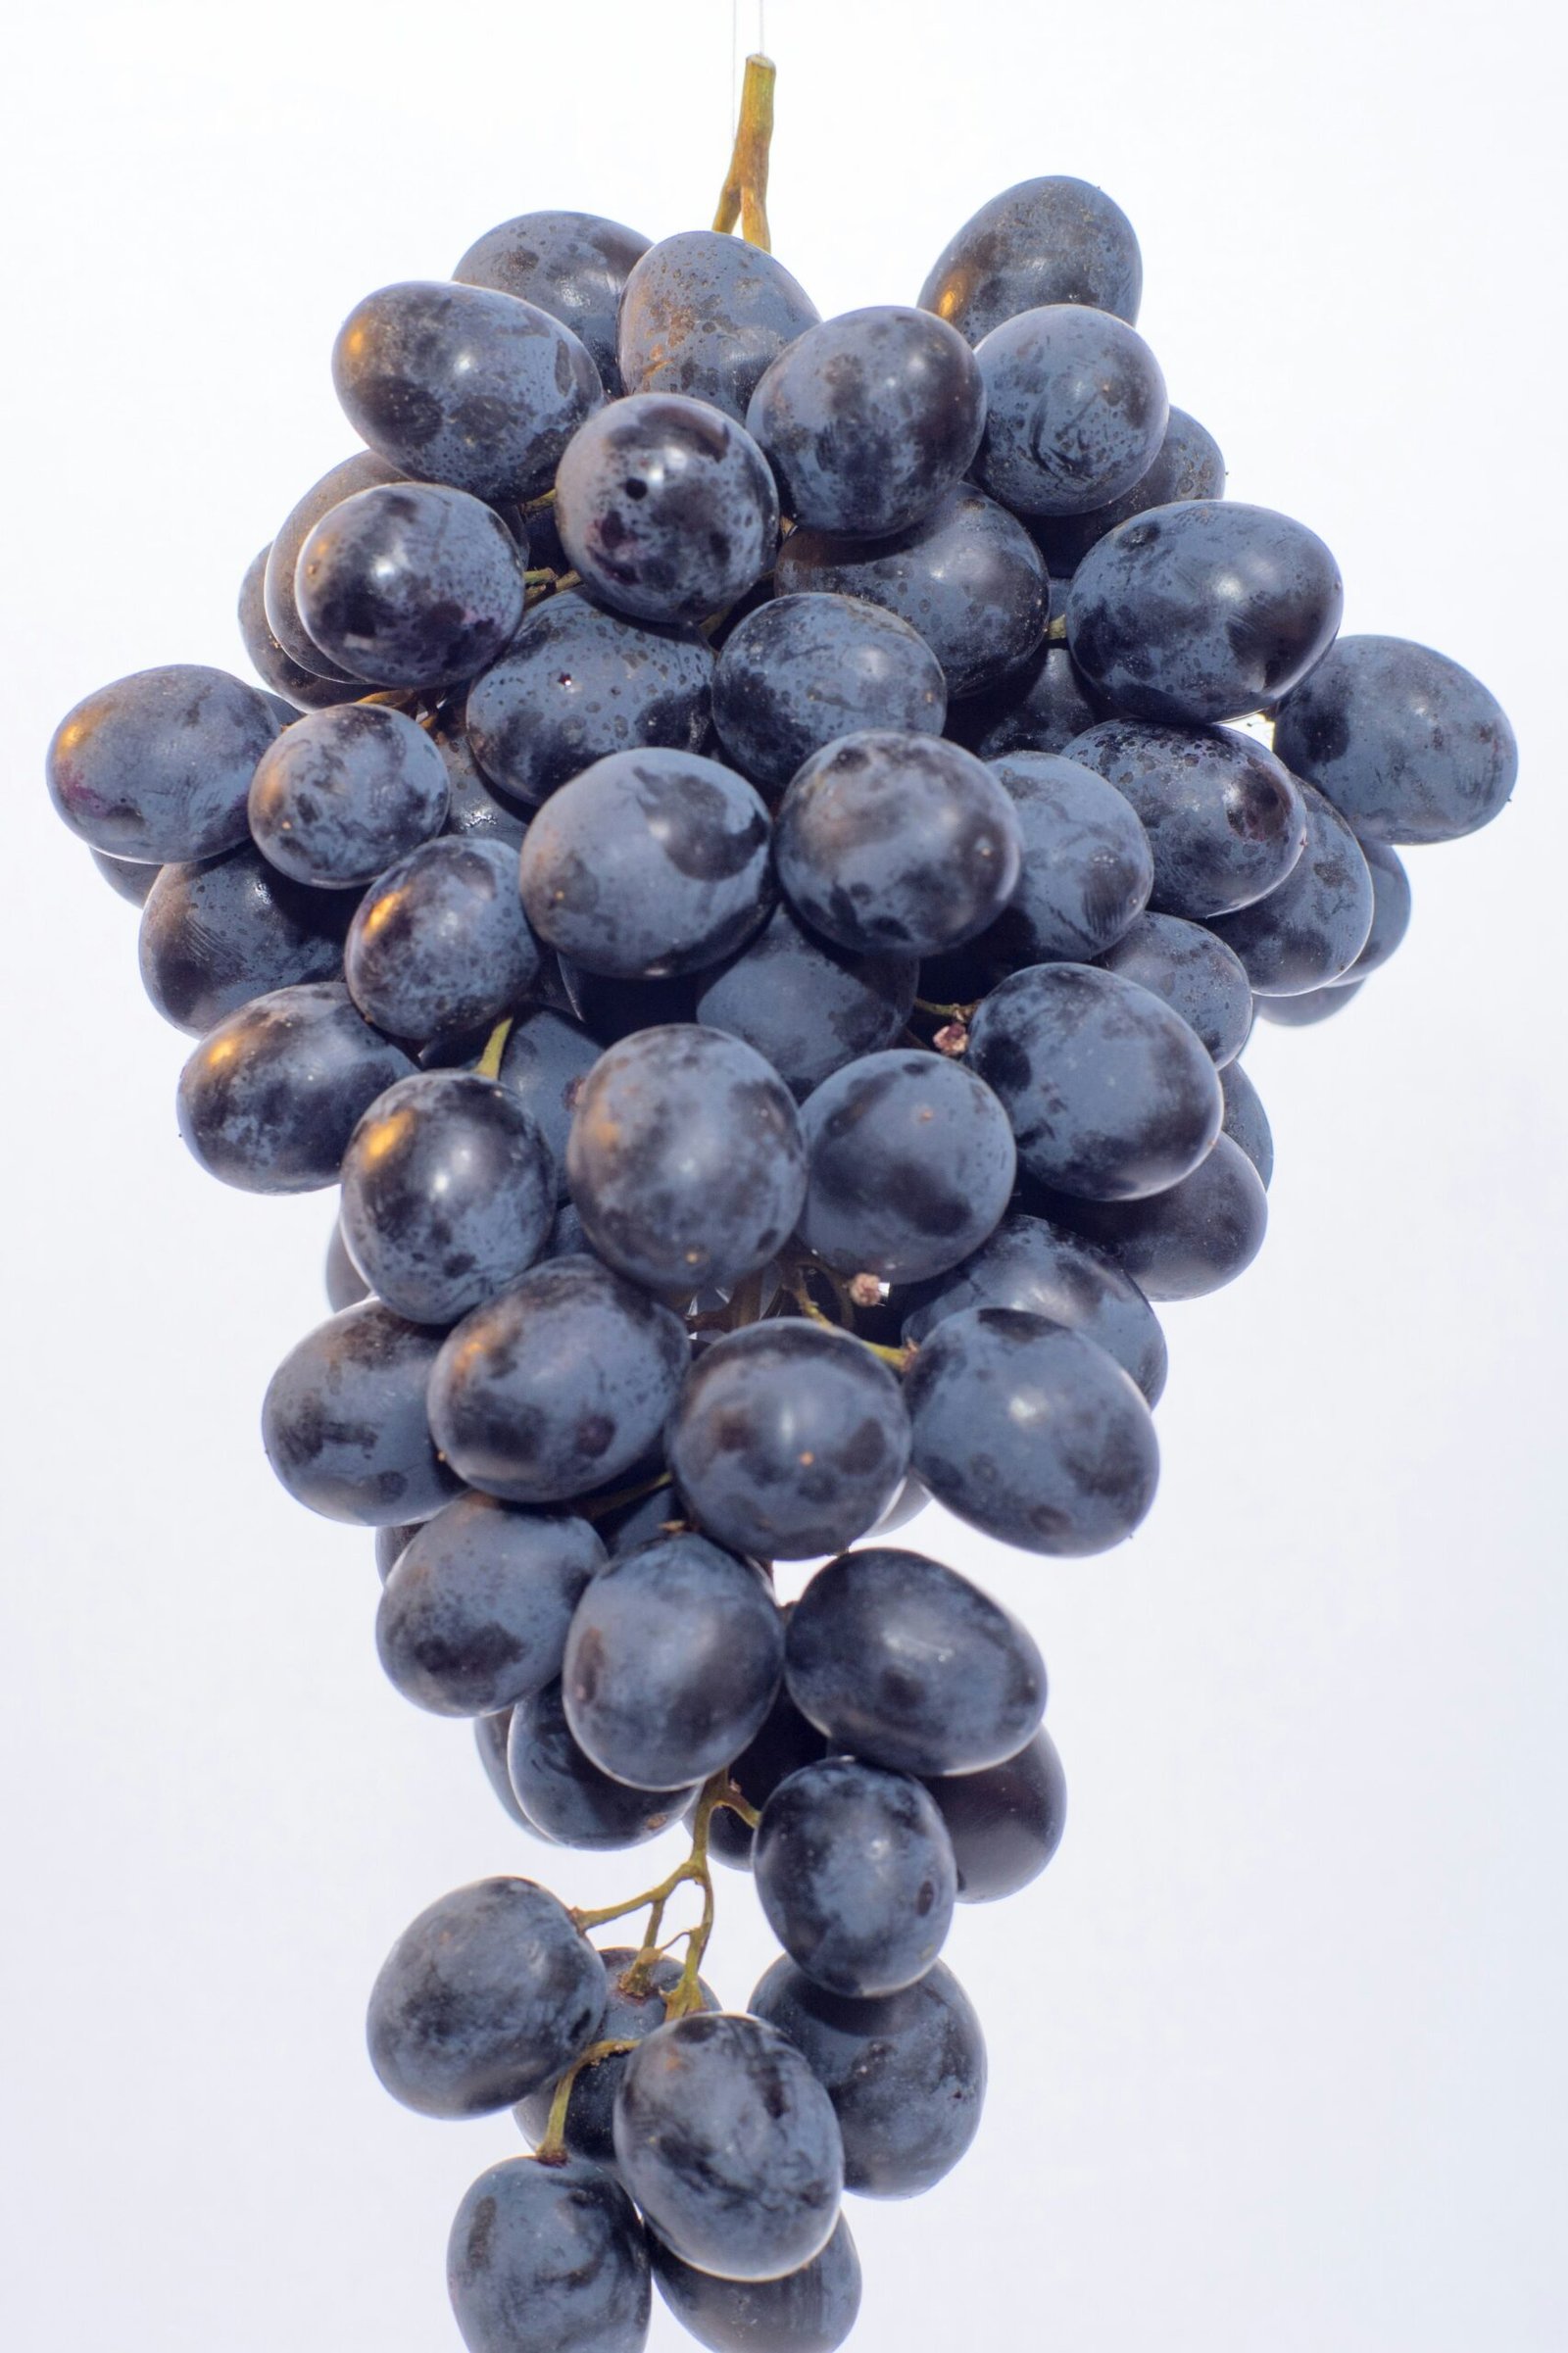 Resveratrol: A Guide to Uses and Scientific Evidence